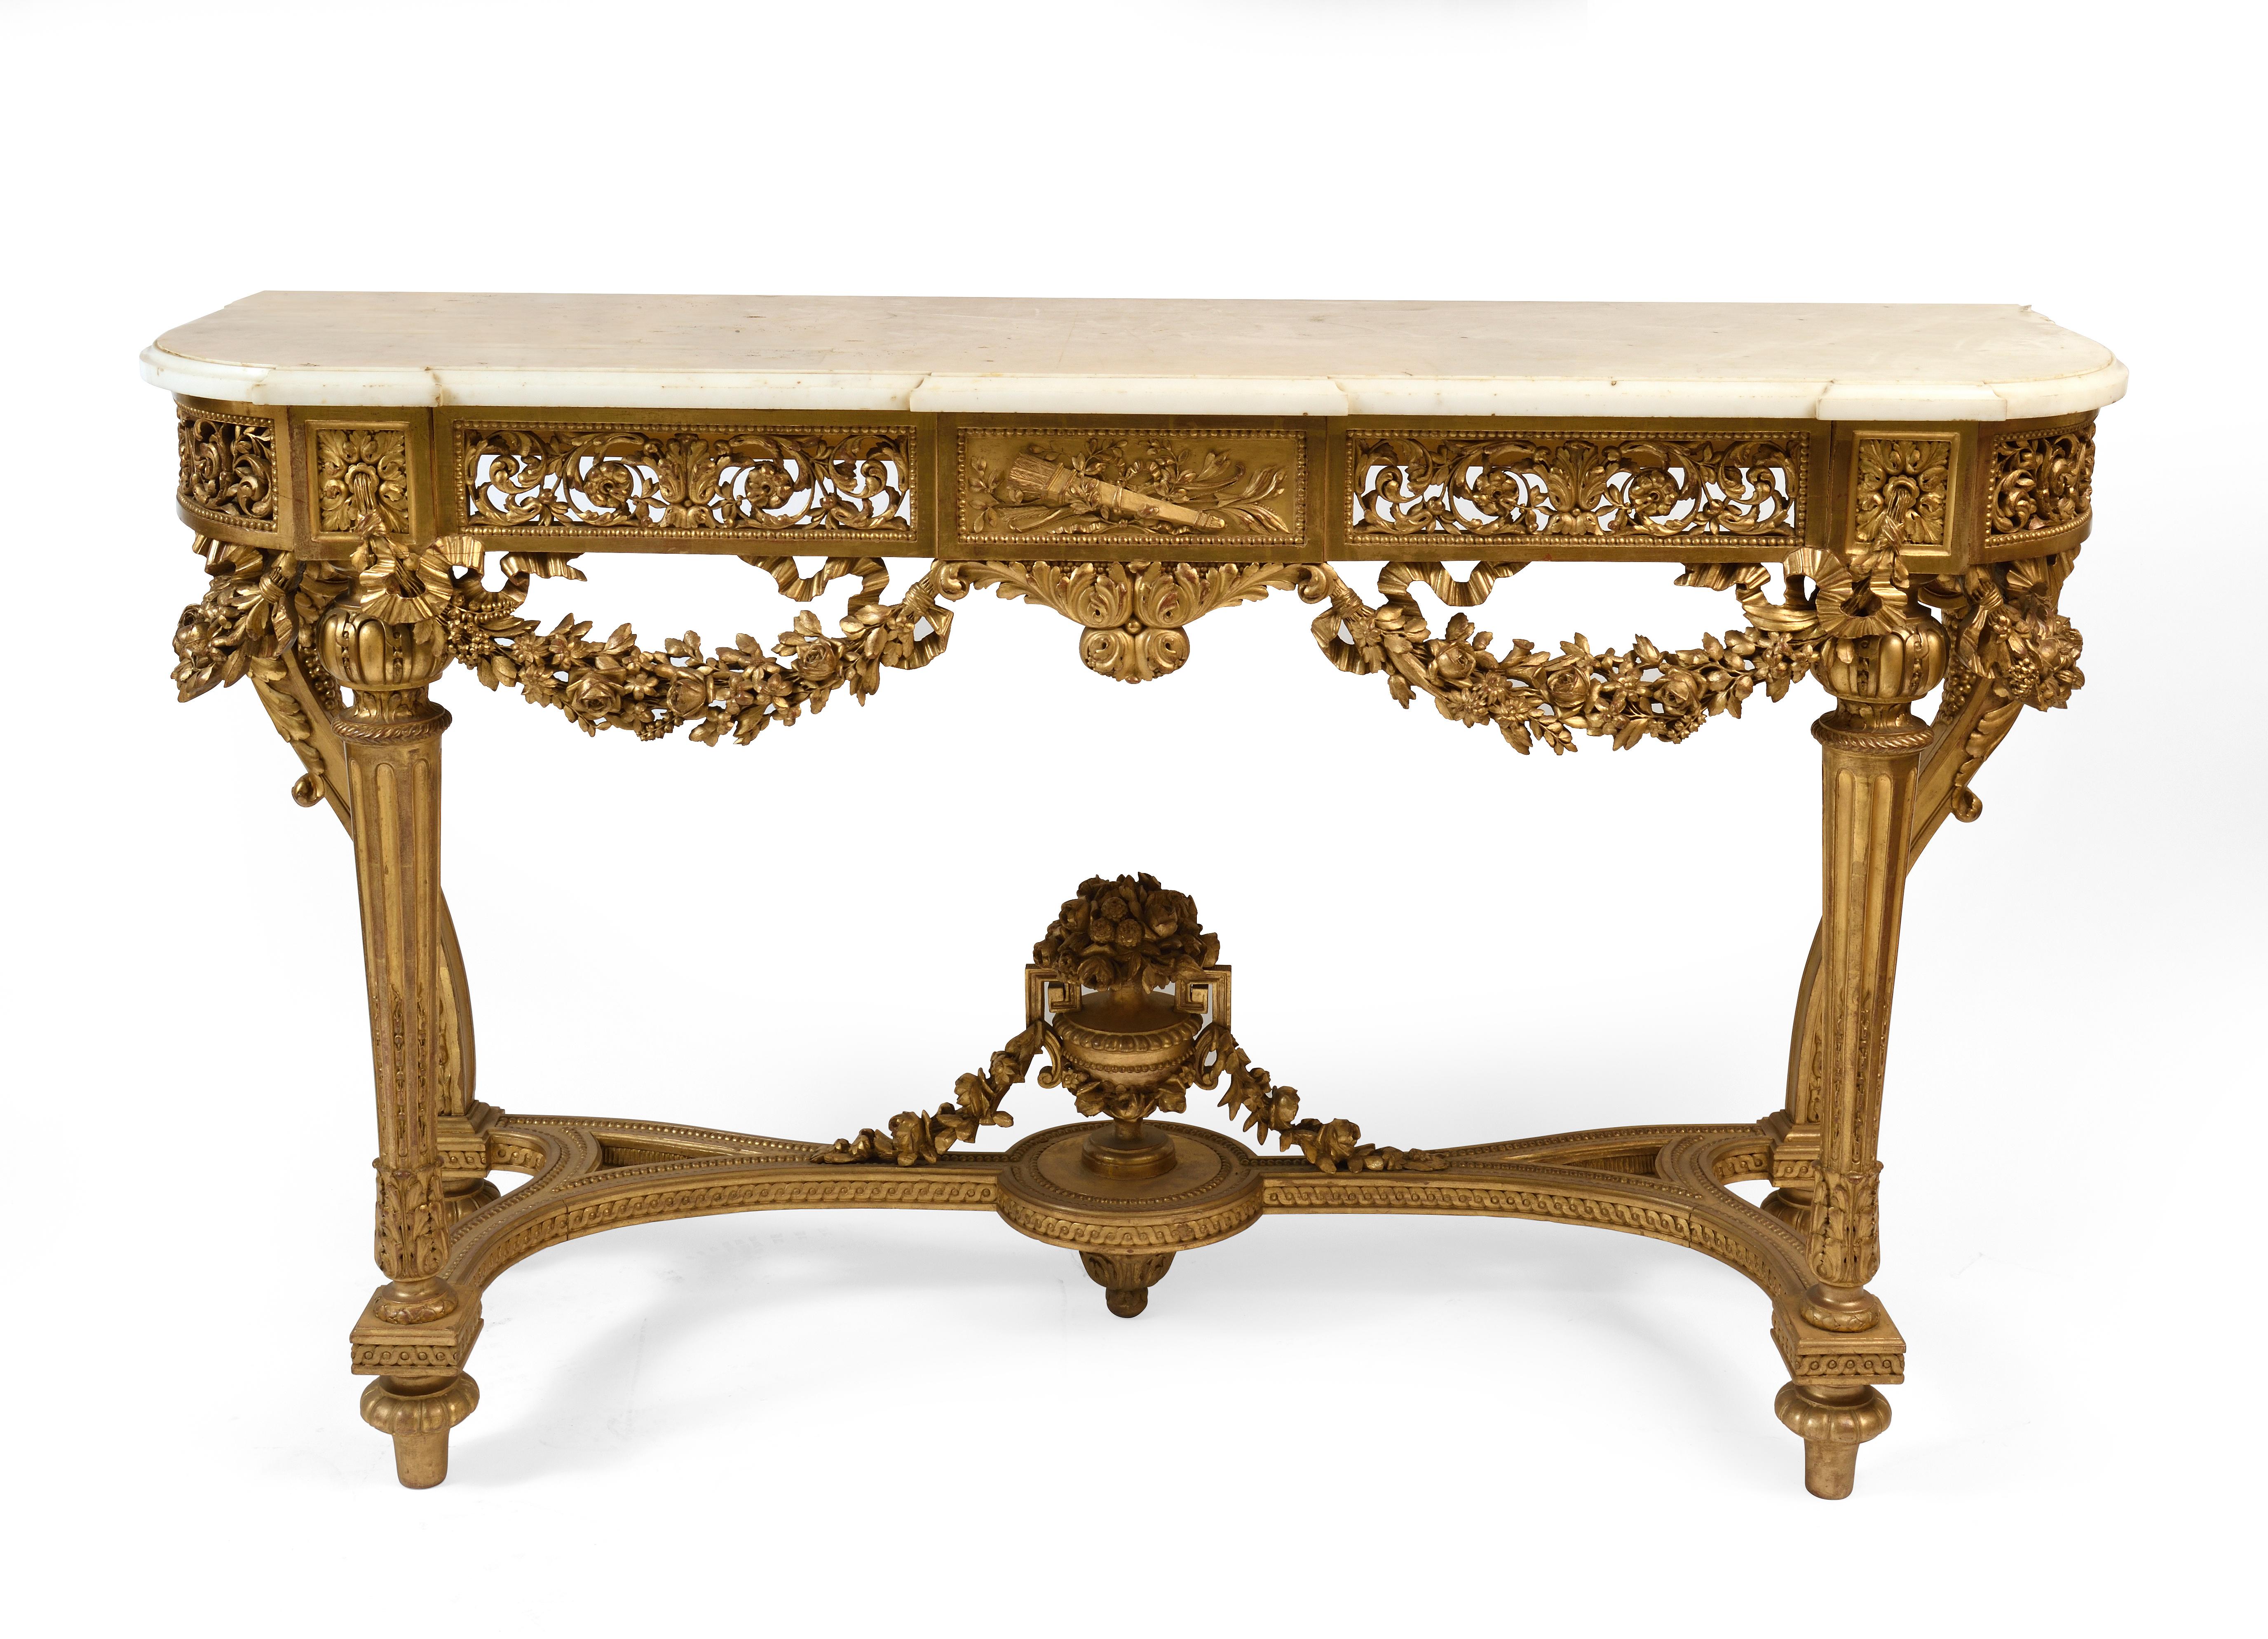 A high end french console giltwood of louis XVI style early 20th century
the white and grey marble top above a frieze carved with scrolling acanthus leaves and drapped with garland raised on four legs joined by a shaped stretcher
and a swag-draped